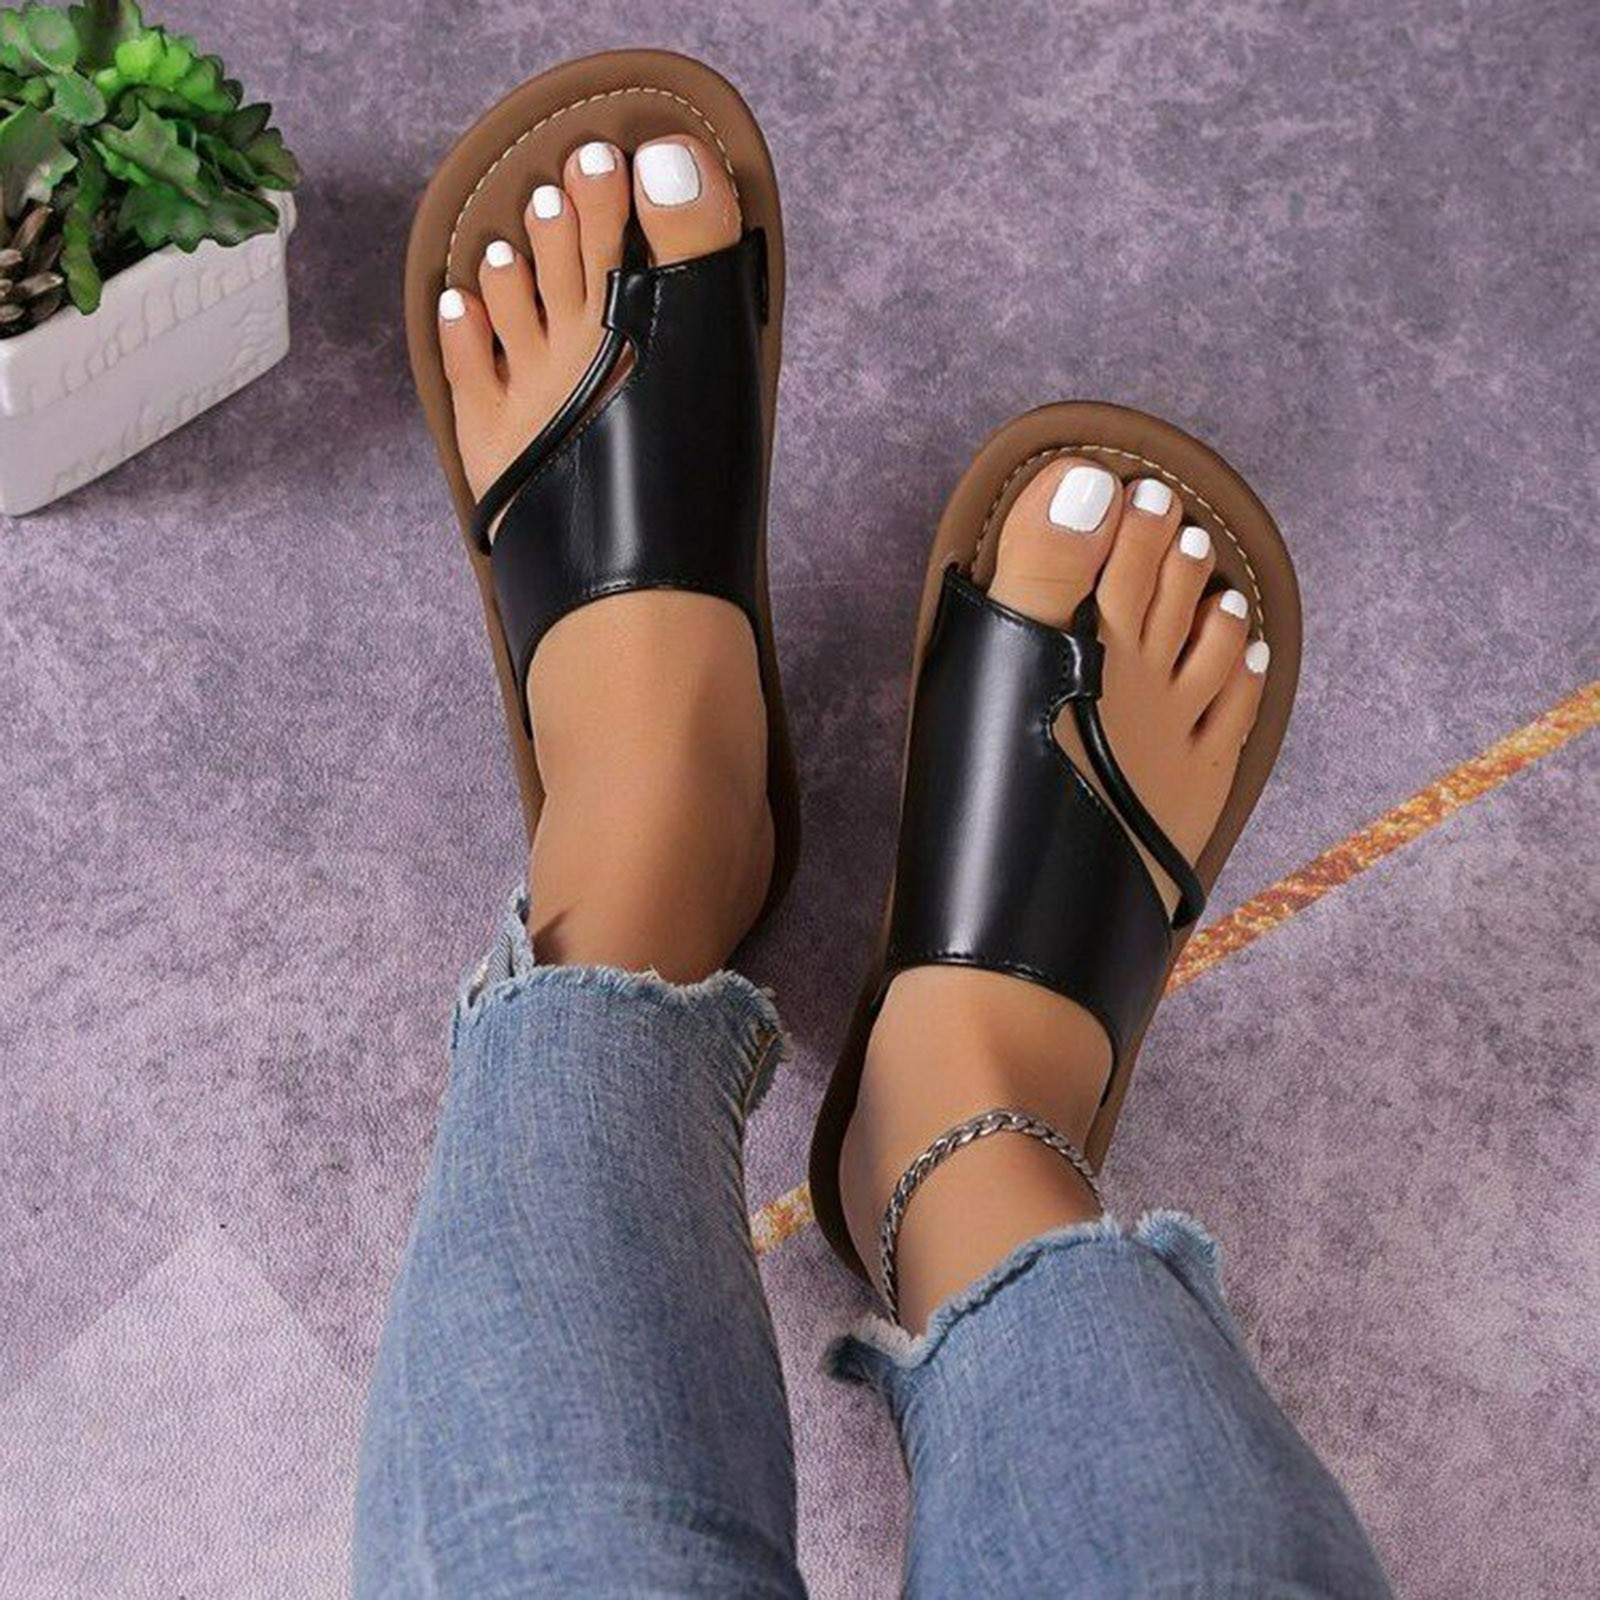 LIANGP Women's Sandals Cool Slippers Soft Soled Non Slip Wear Resisting ...